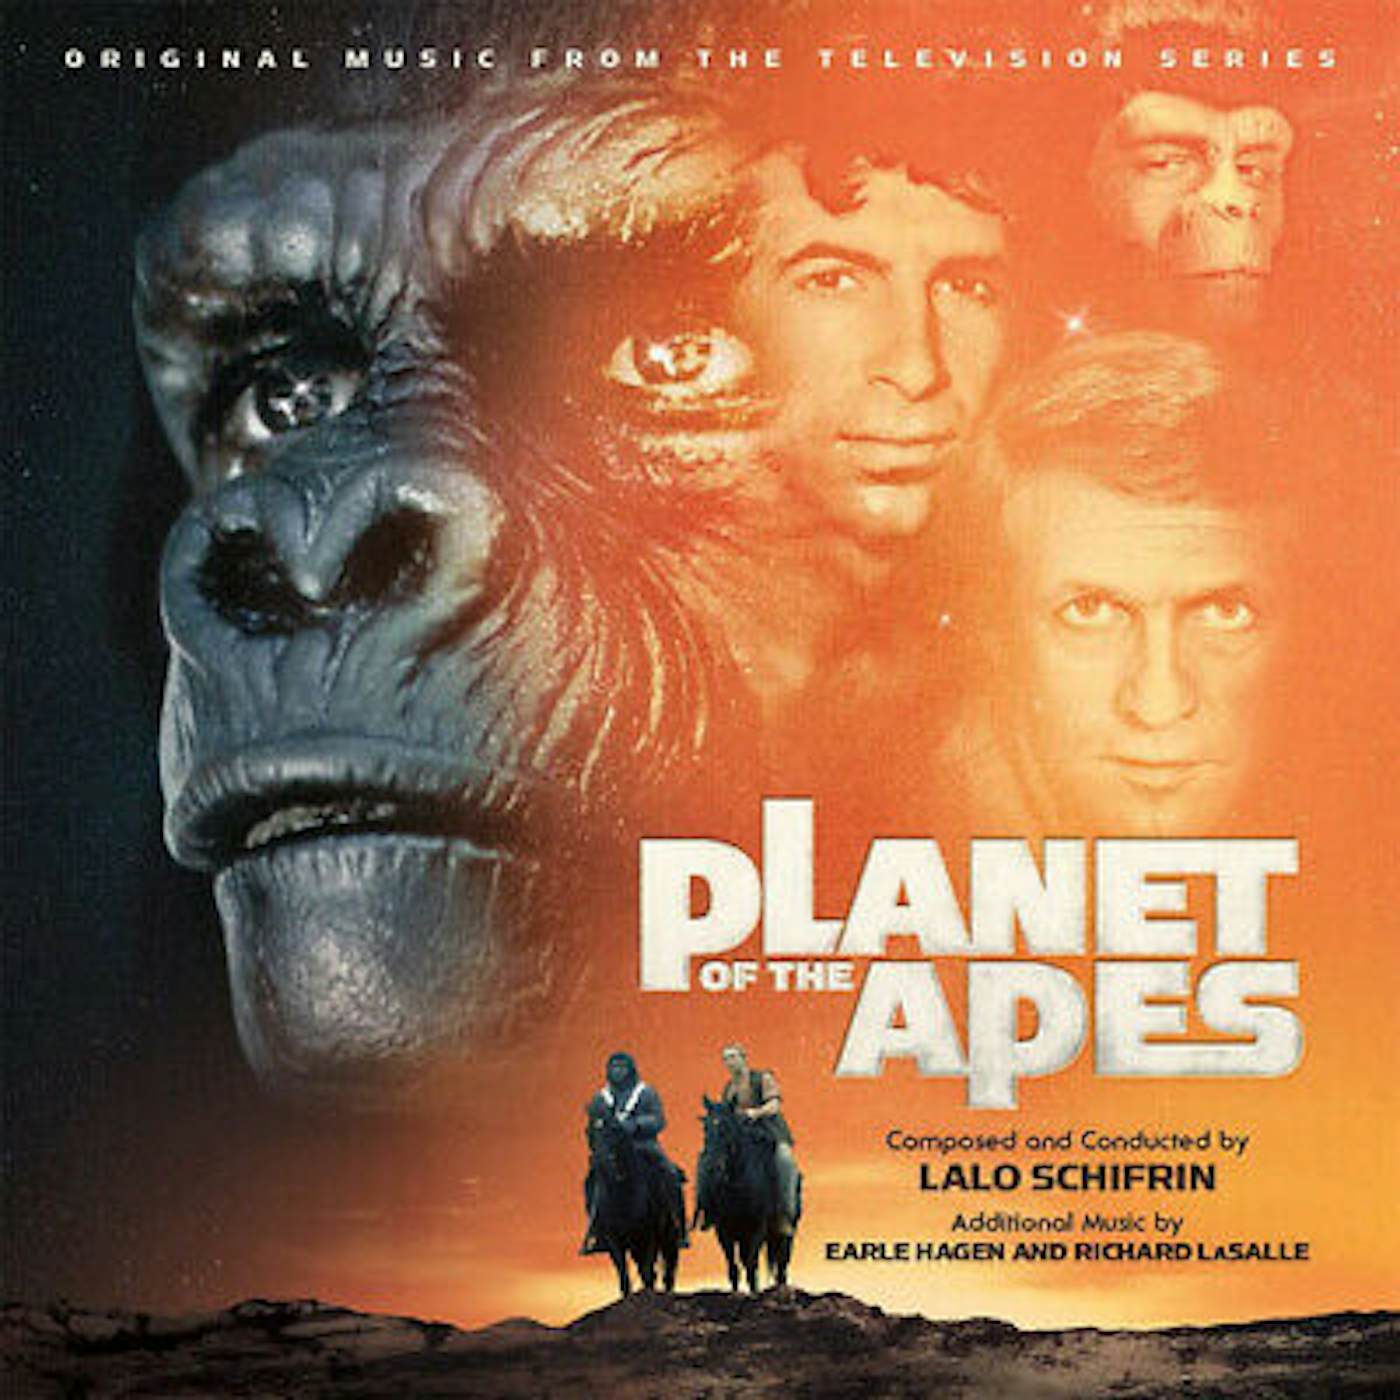 Lalo Schifrin PLANET OF THE APES: TV SERIES / Original Soundtrack CD